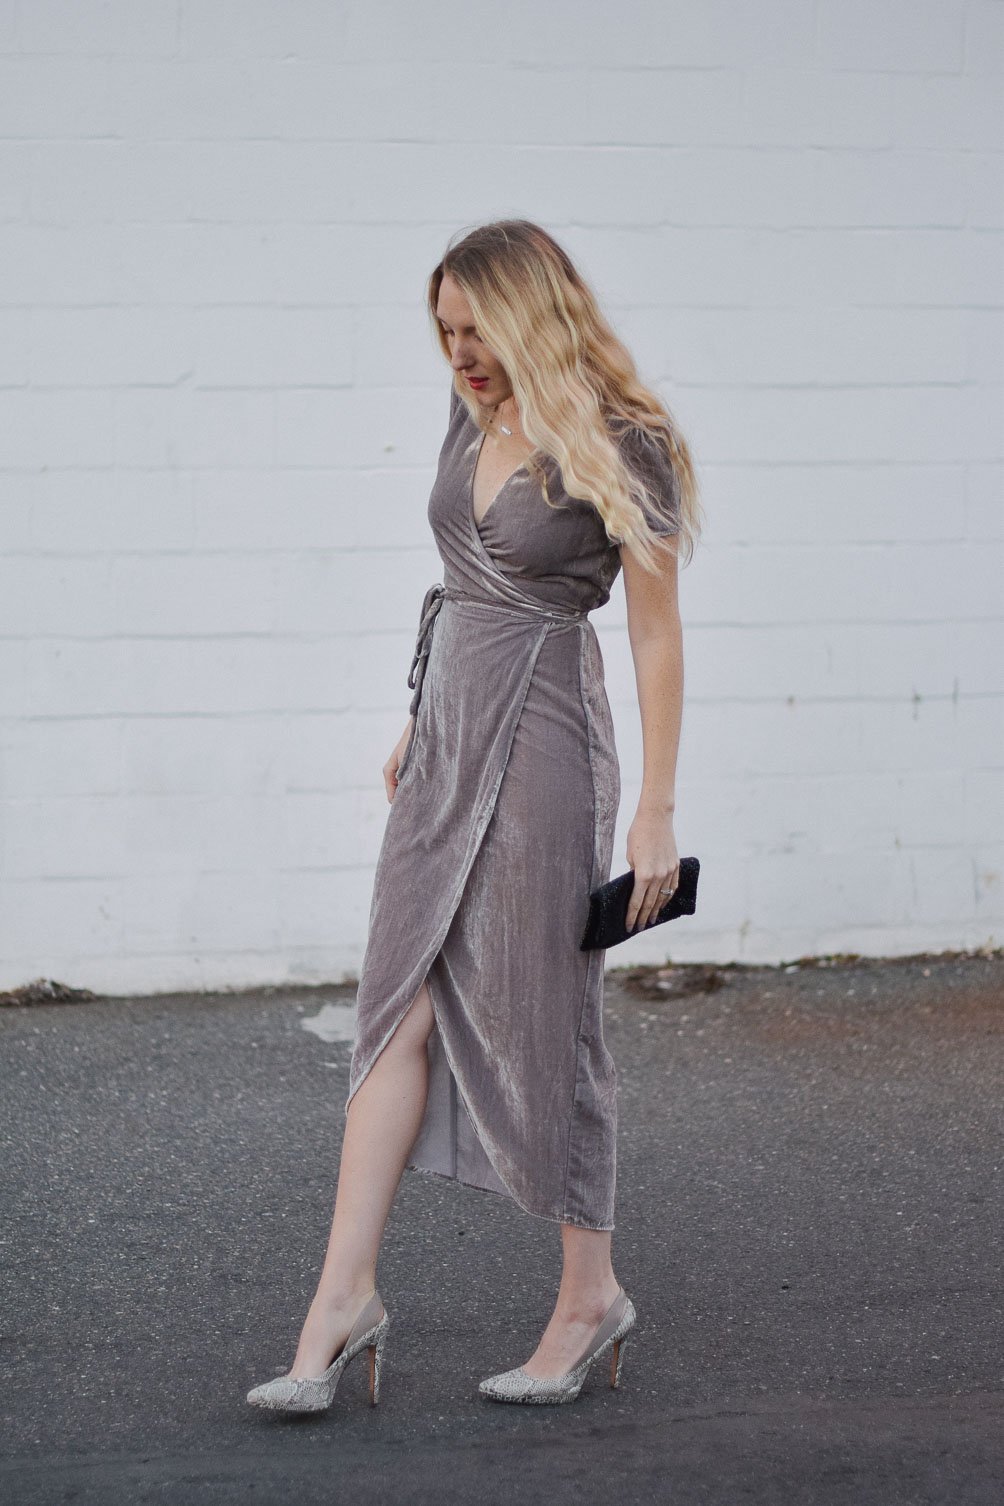 styling a metallic holiday dress party outfit with snakeskin heels and beaded clutch